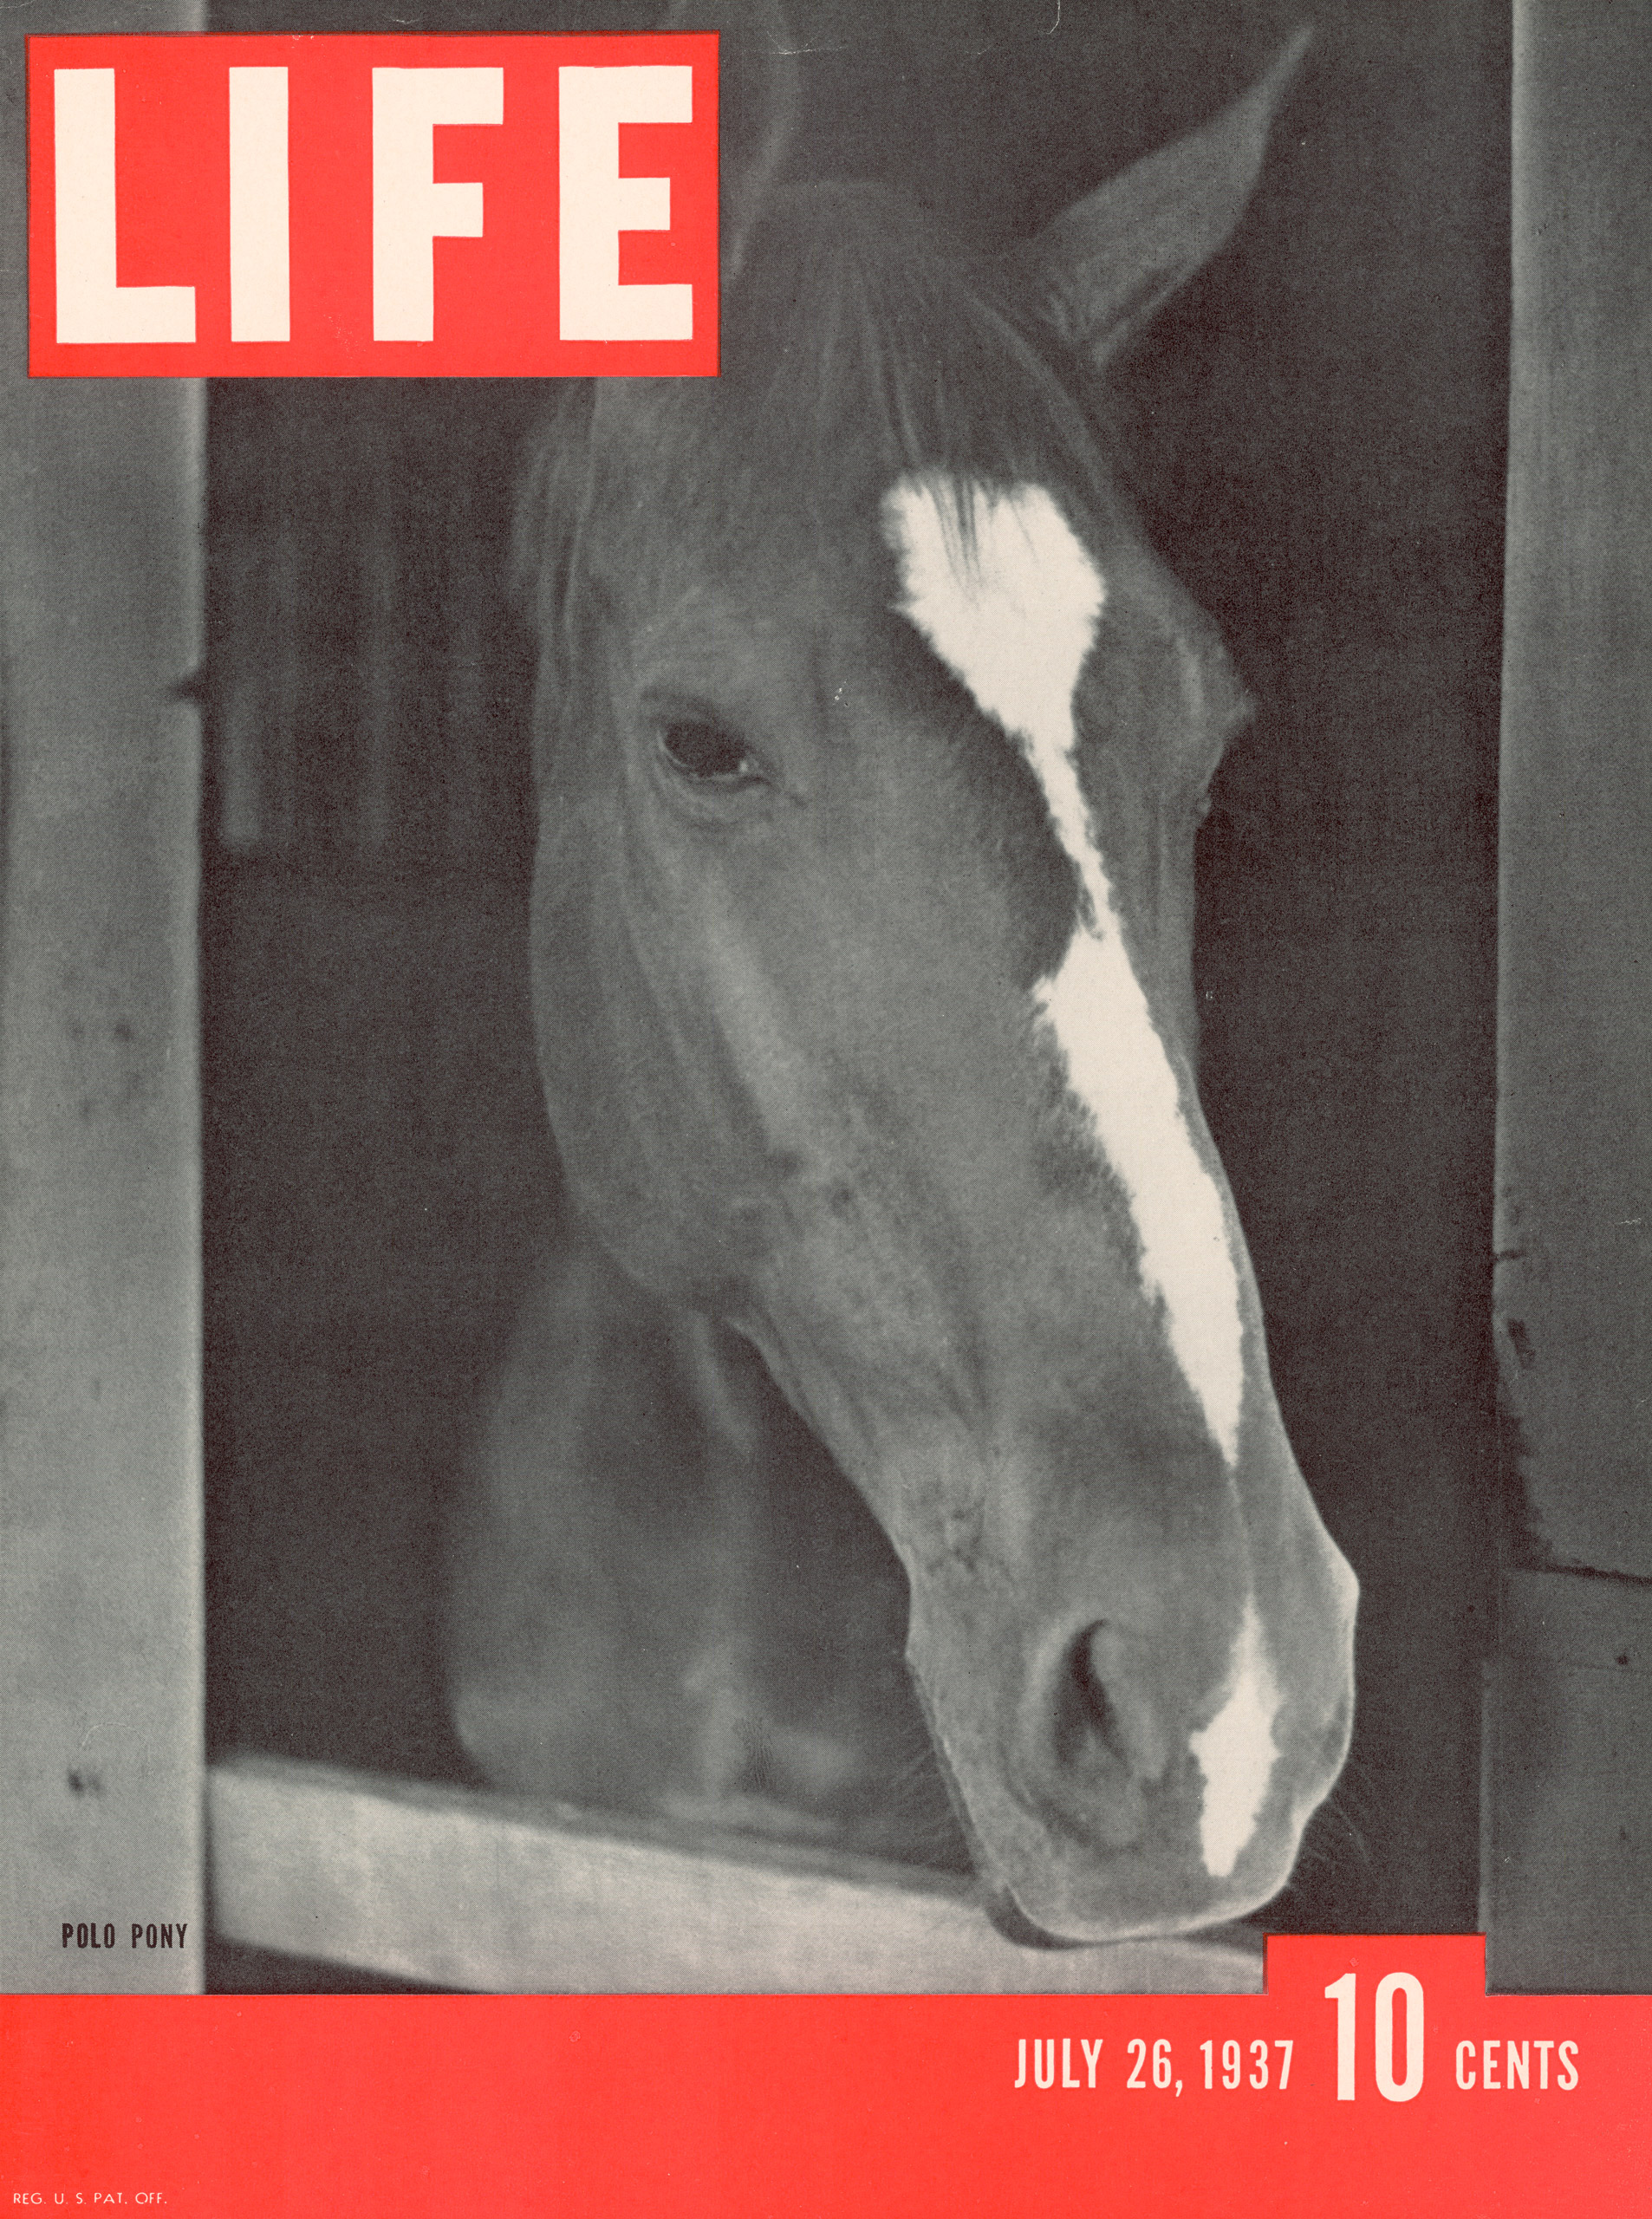 July 26, 1937 LIFE Magazine cover